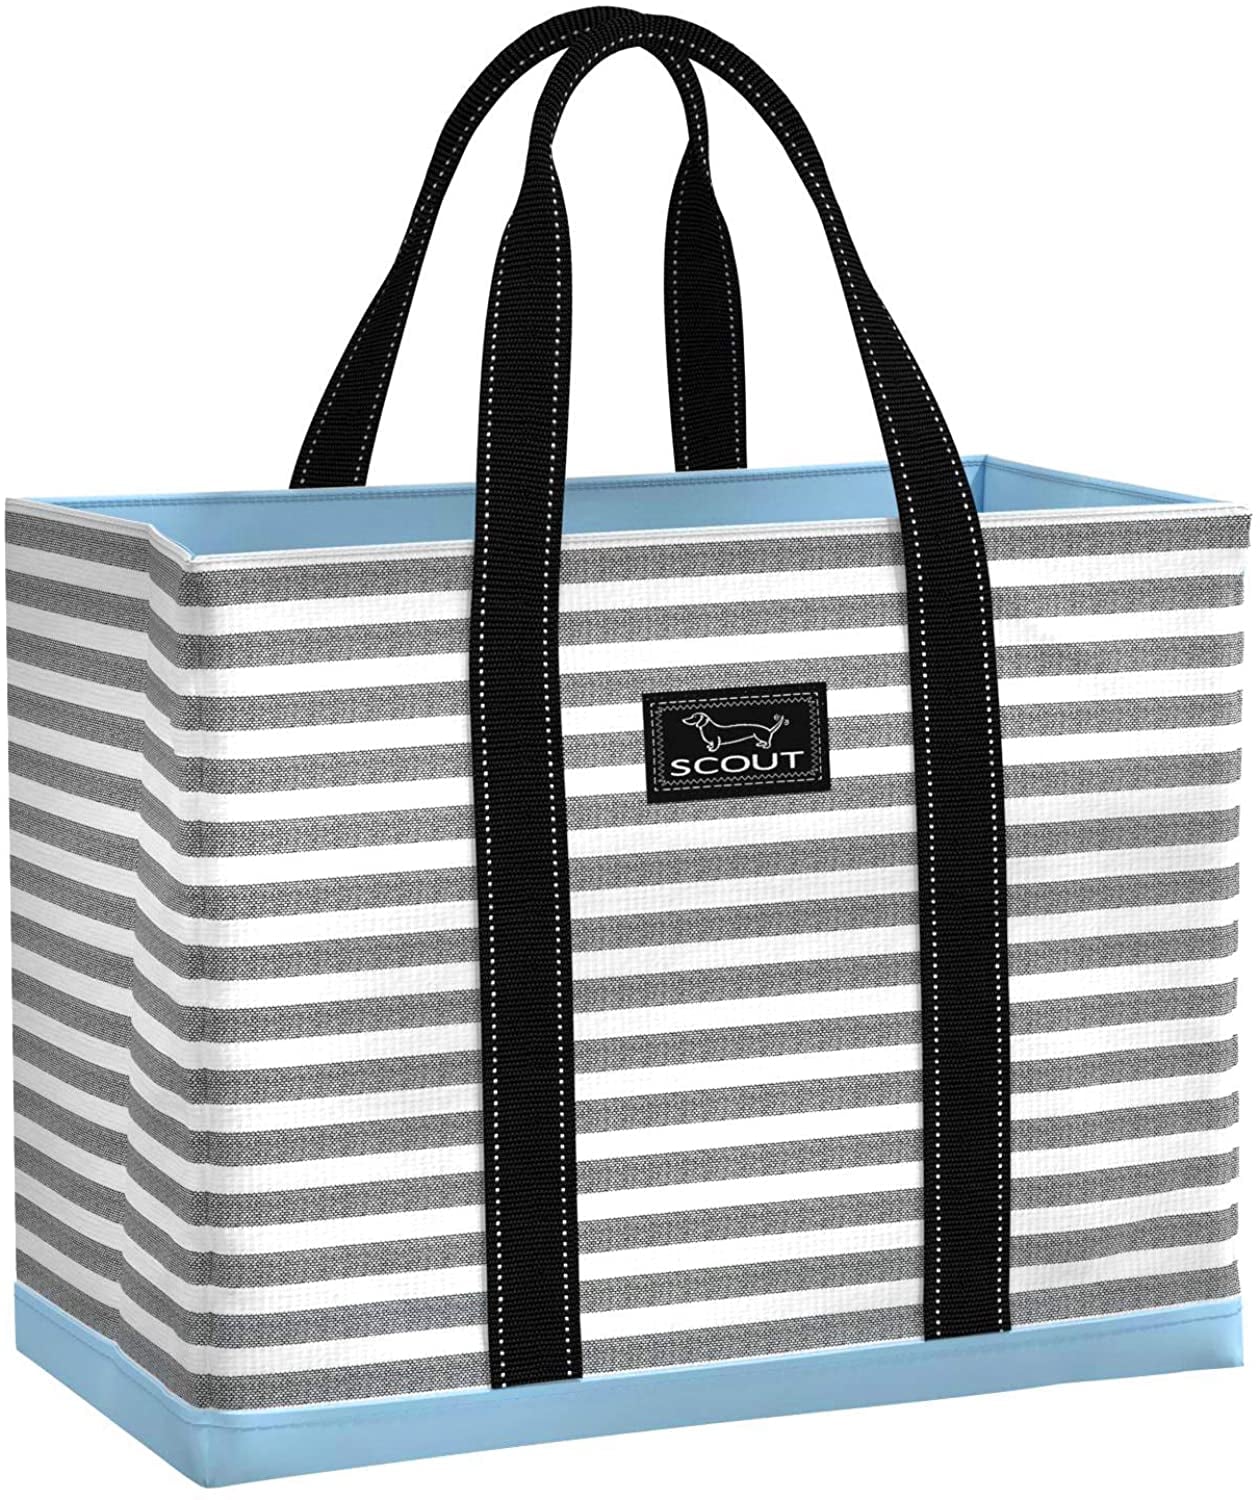 Details about   5 Jumbo Size Grocery Tote Shopping Bag Blue Reusable Eco Friendly Large Bags XL 